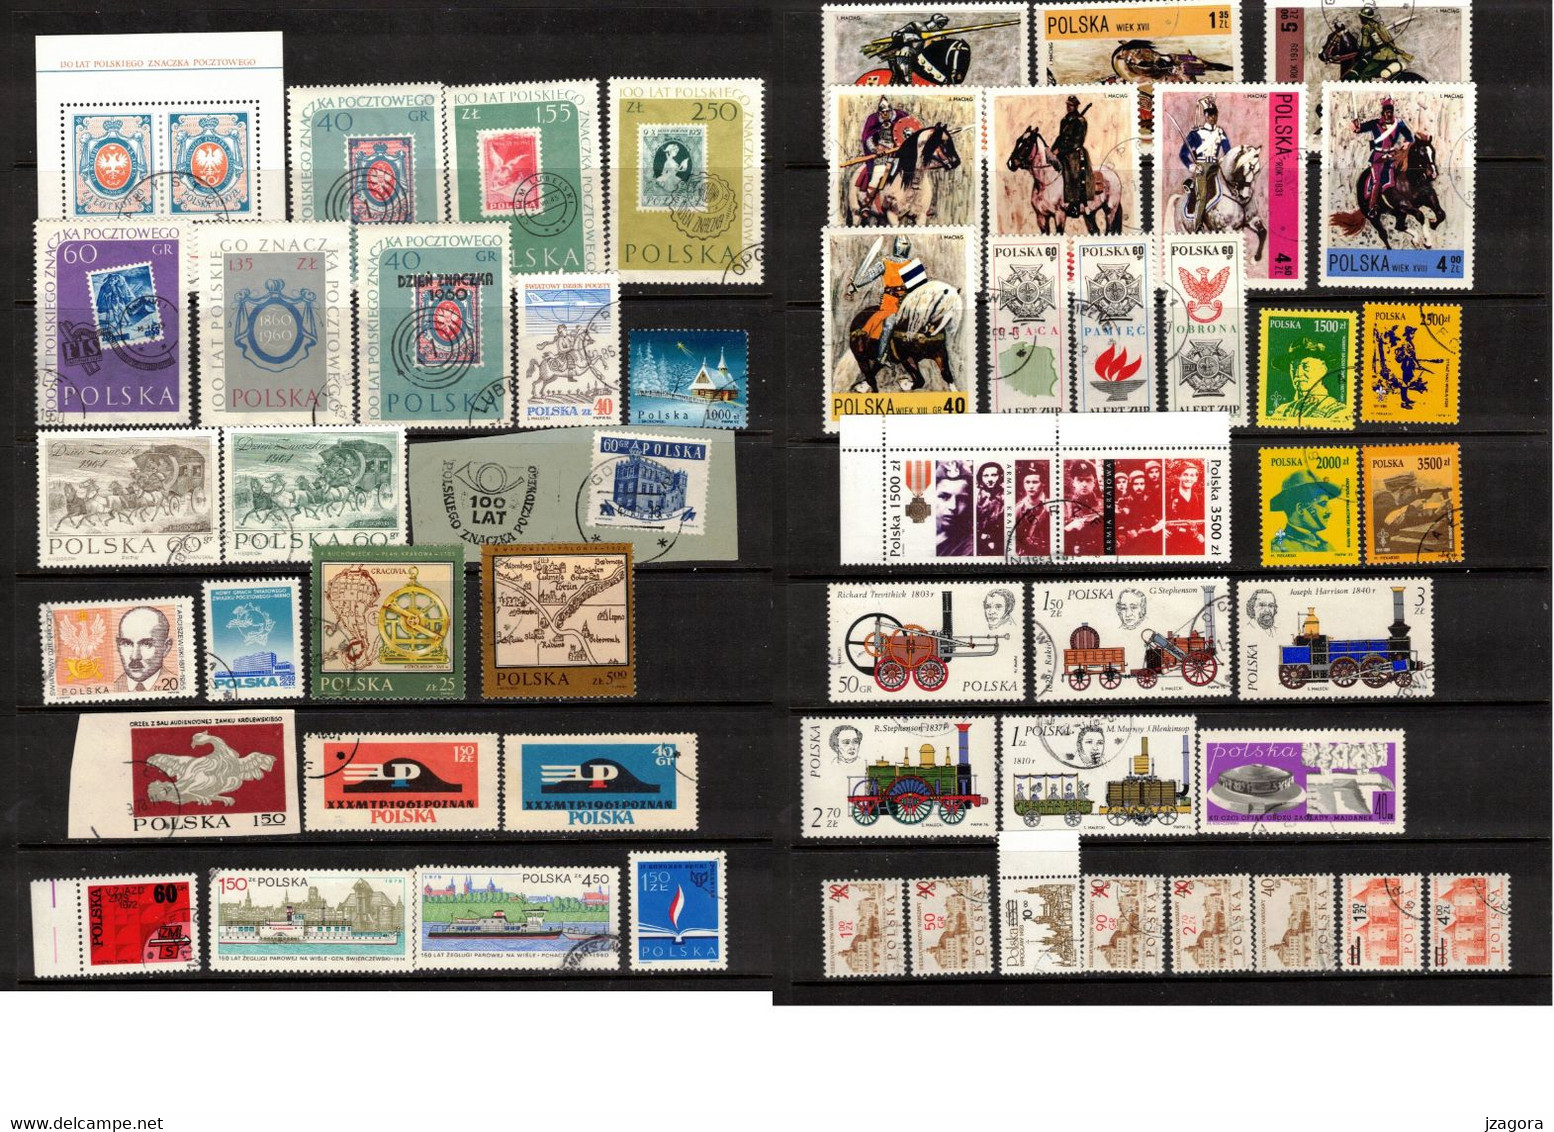 POLAND POLEN POLOGNE COLLECTION 54 USED VARIOUS STAMPS MANY WITH GUM Post History Scouting - Collections